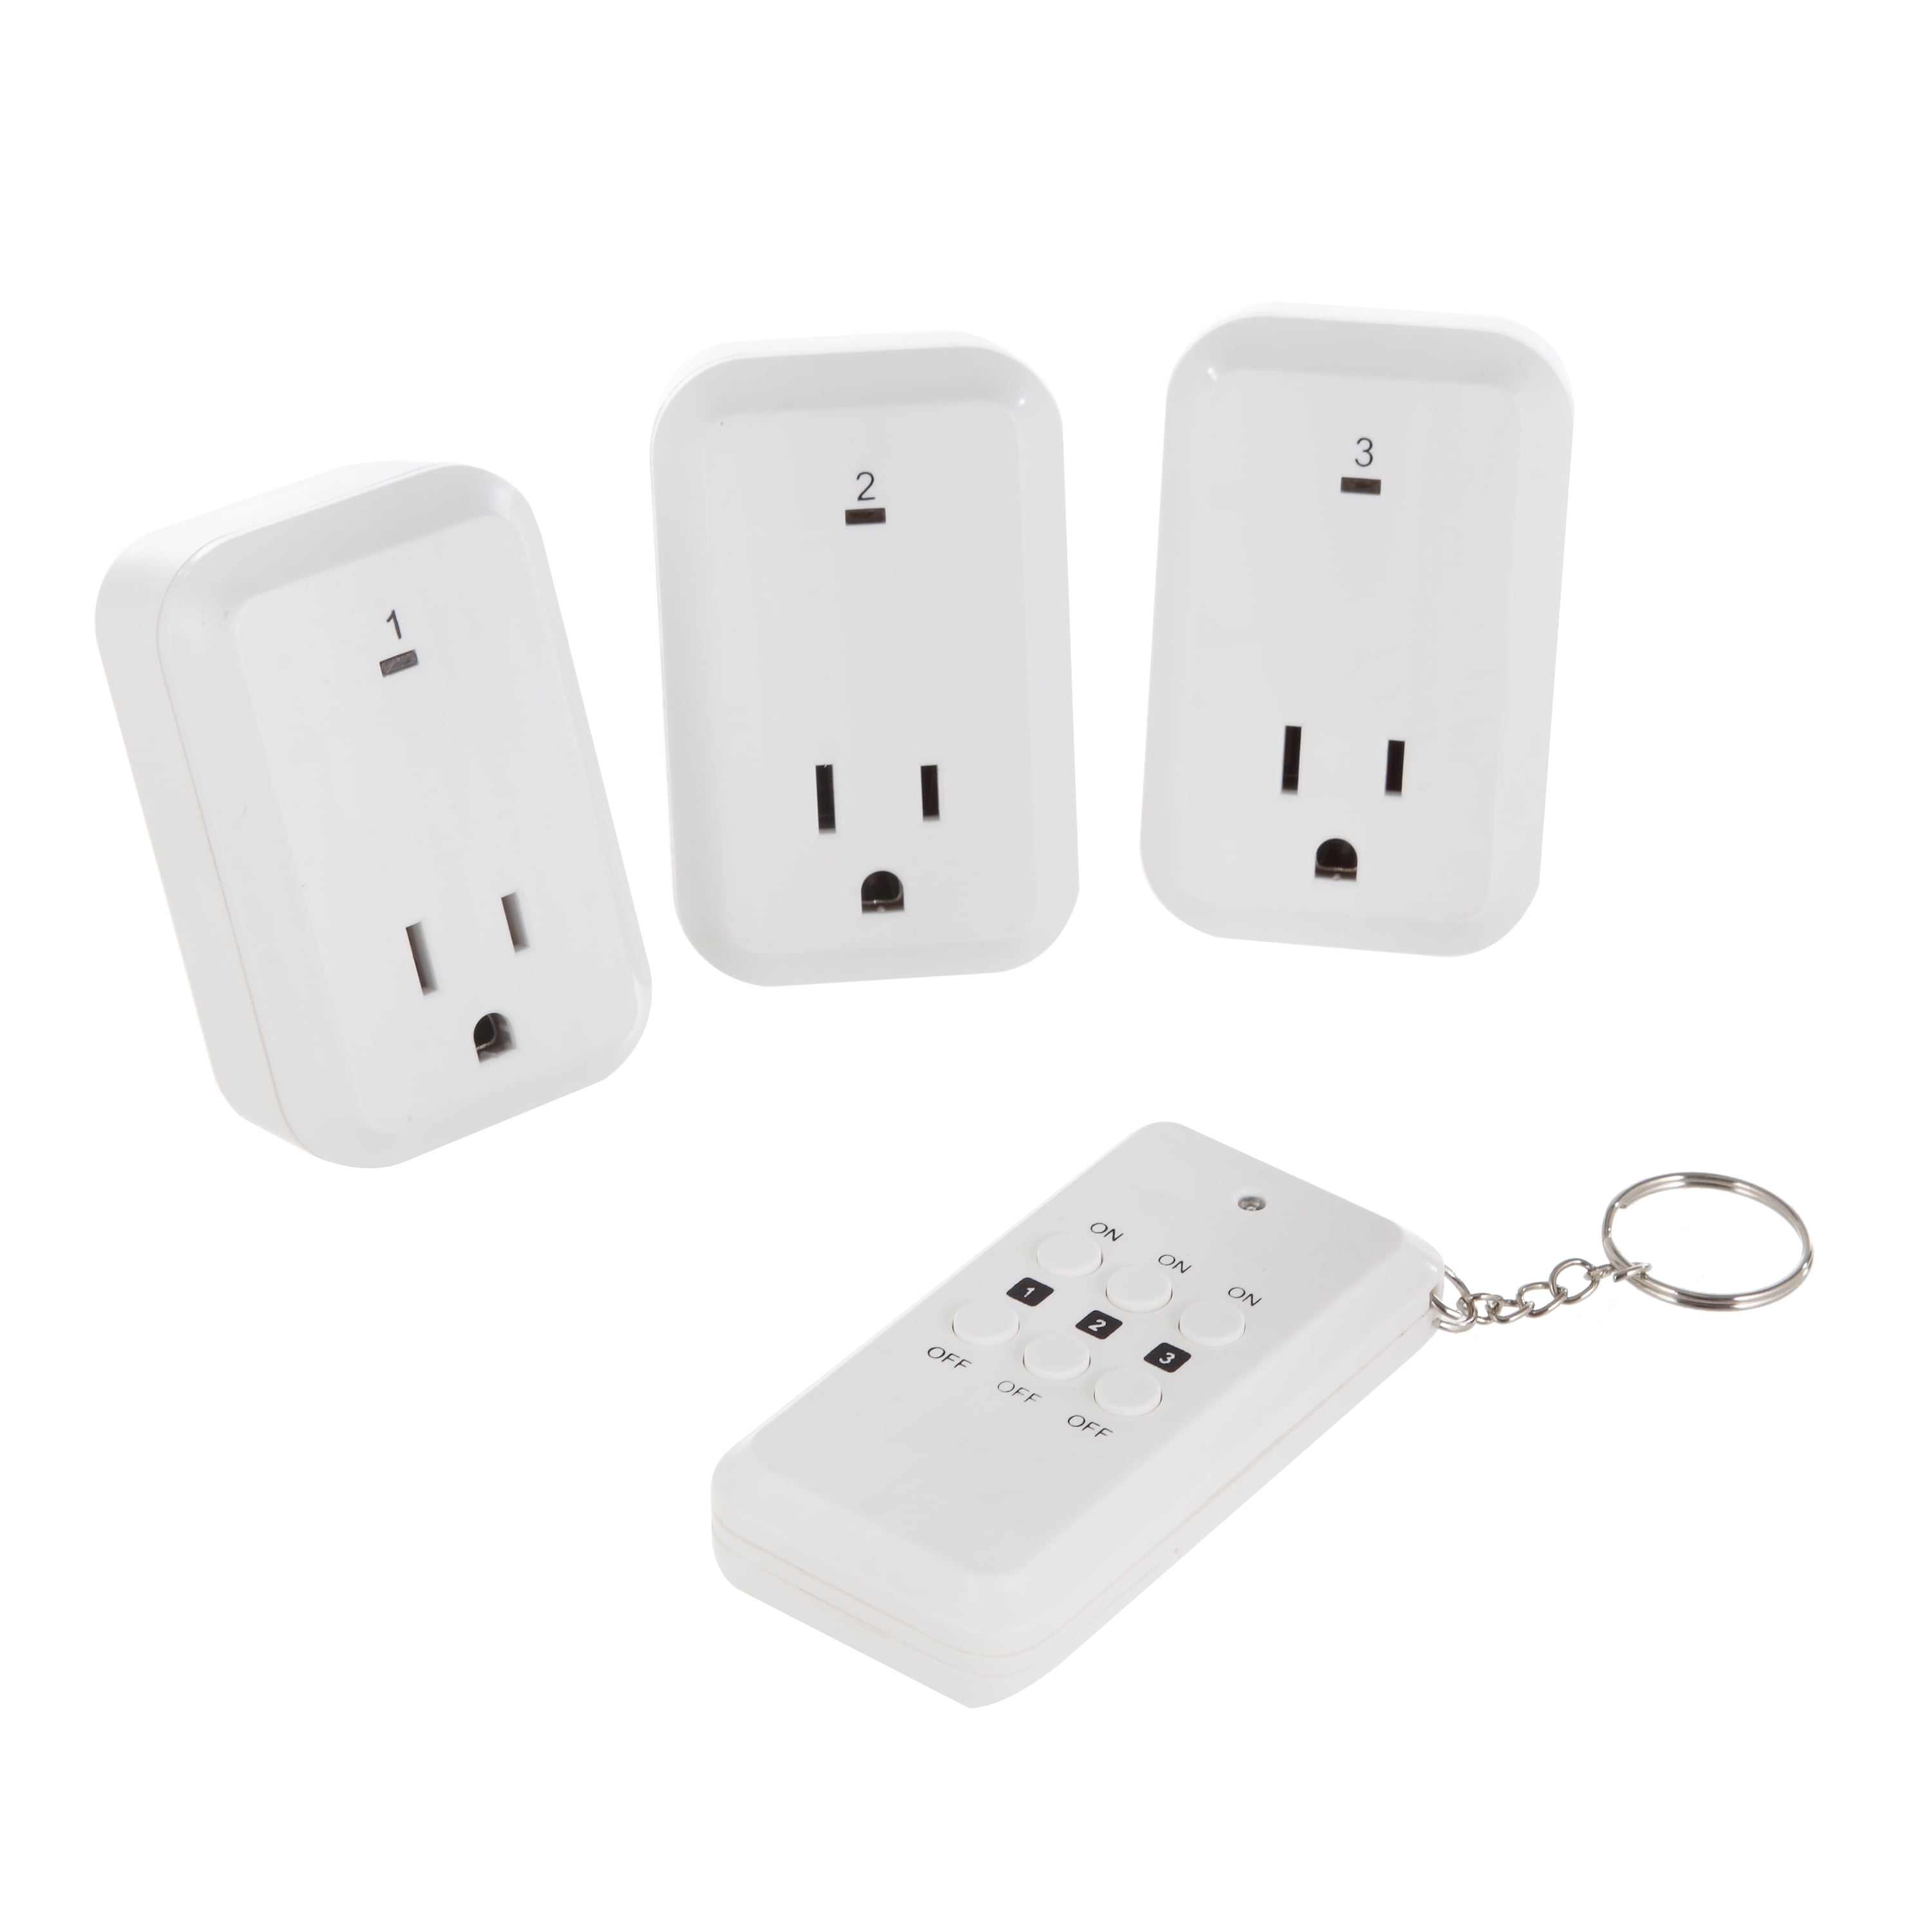 Hyper Tough Wireless Outlets with Remote Control, Indoor with 3 Receivers 